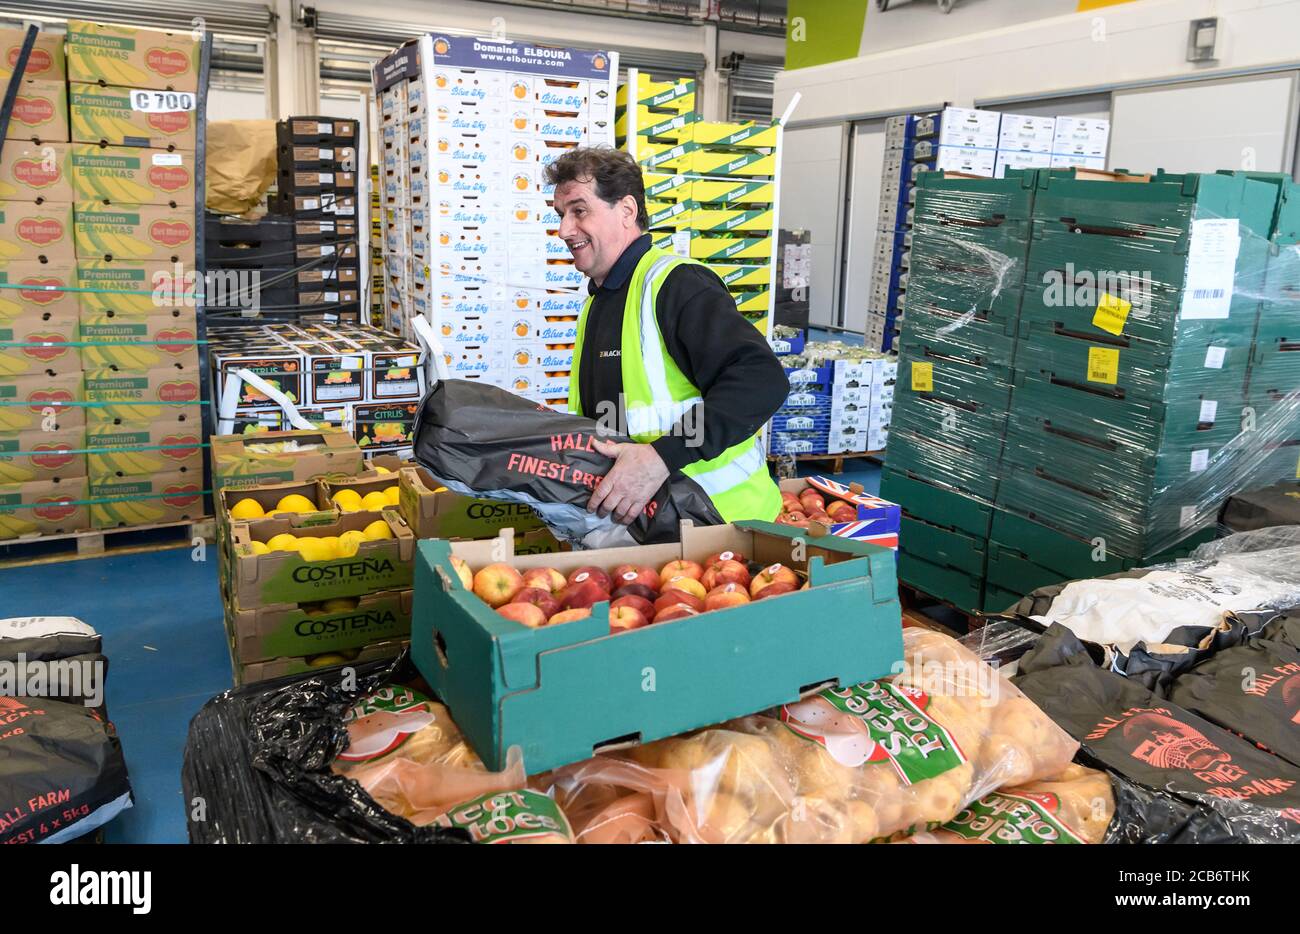 Staff and customers at the Birmingham Wholesale Market. The largest integrated market in the UK providing fruit and vegetable, fish, poultry, meat and flower trading operations on one site. The current premises opened in May 2018. Stock Photo